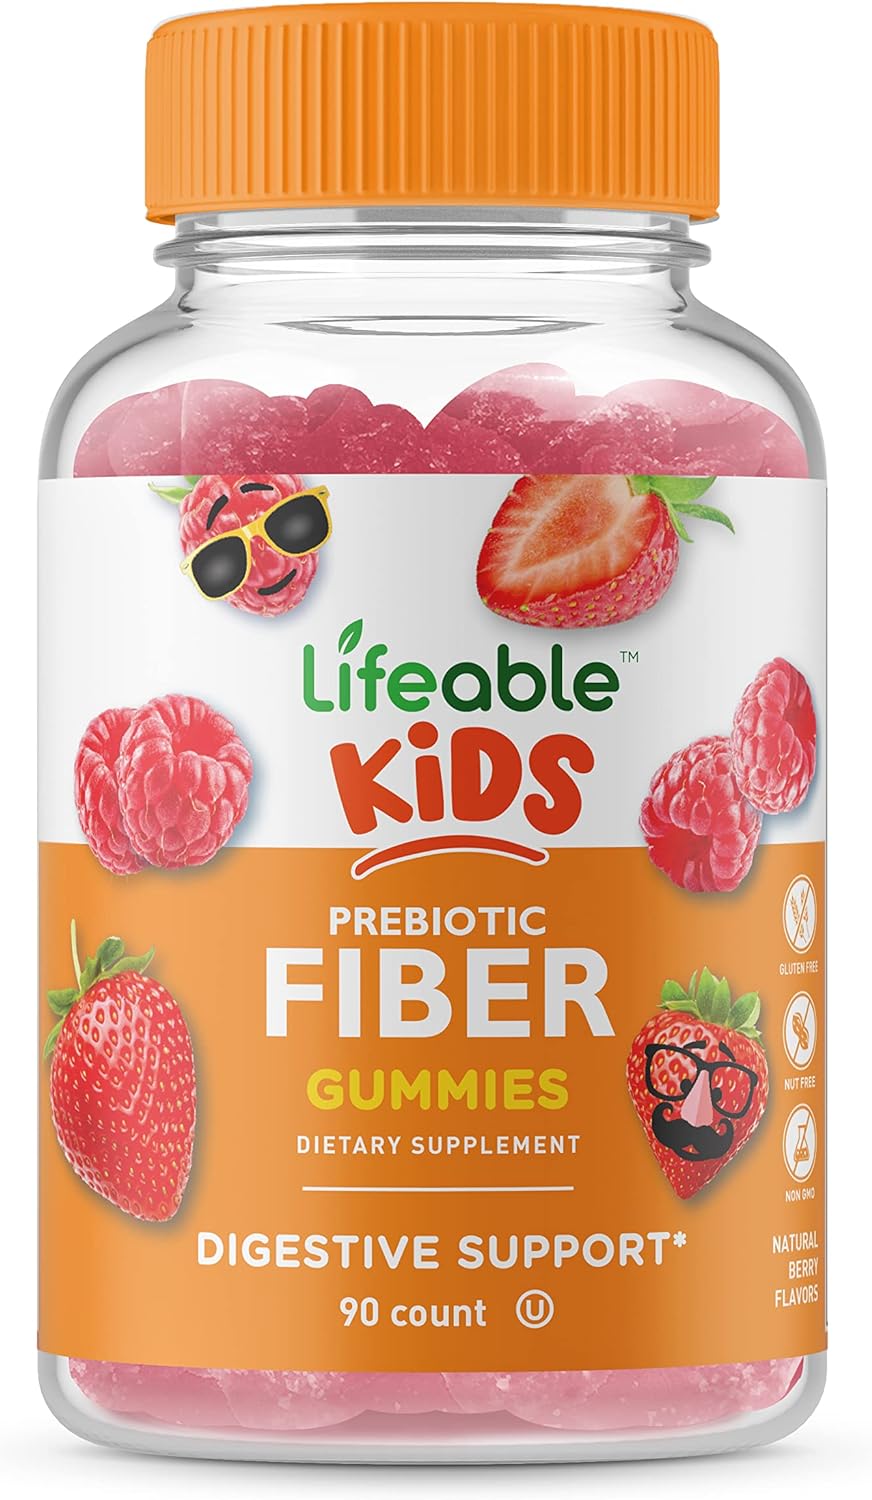 Lifeable Prebiotic Fiber Supplement Gummies for Kids - 5g - Great Tasting Natural Flavored Gummy - Gluten Free, Vegetarian, GMO Free Chewable - for Children, Teen, Toddler - 90 Gummies - 45 Doses